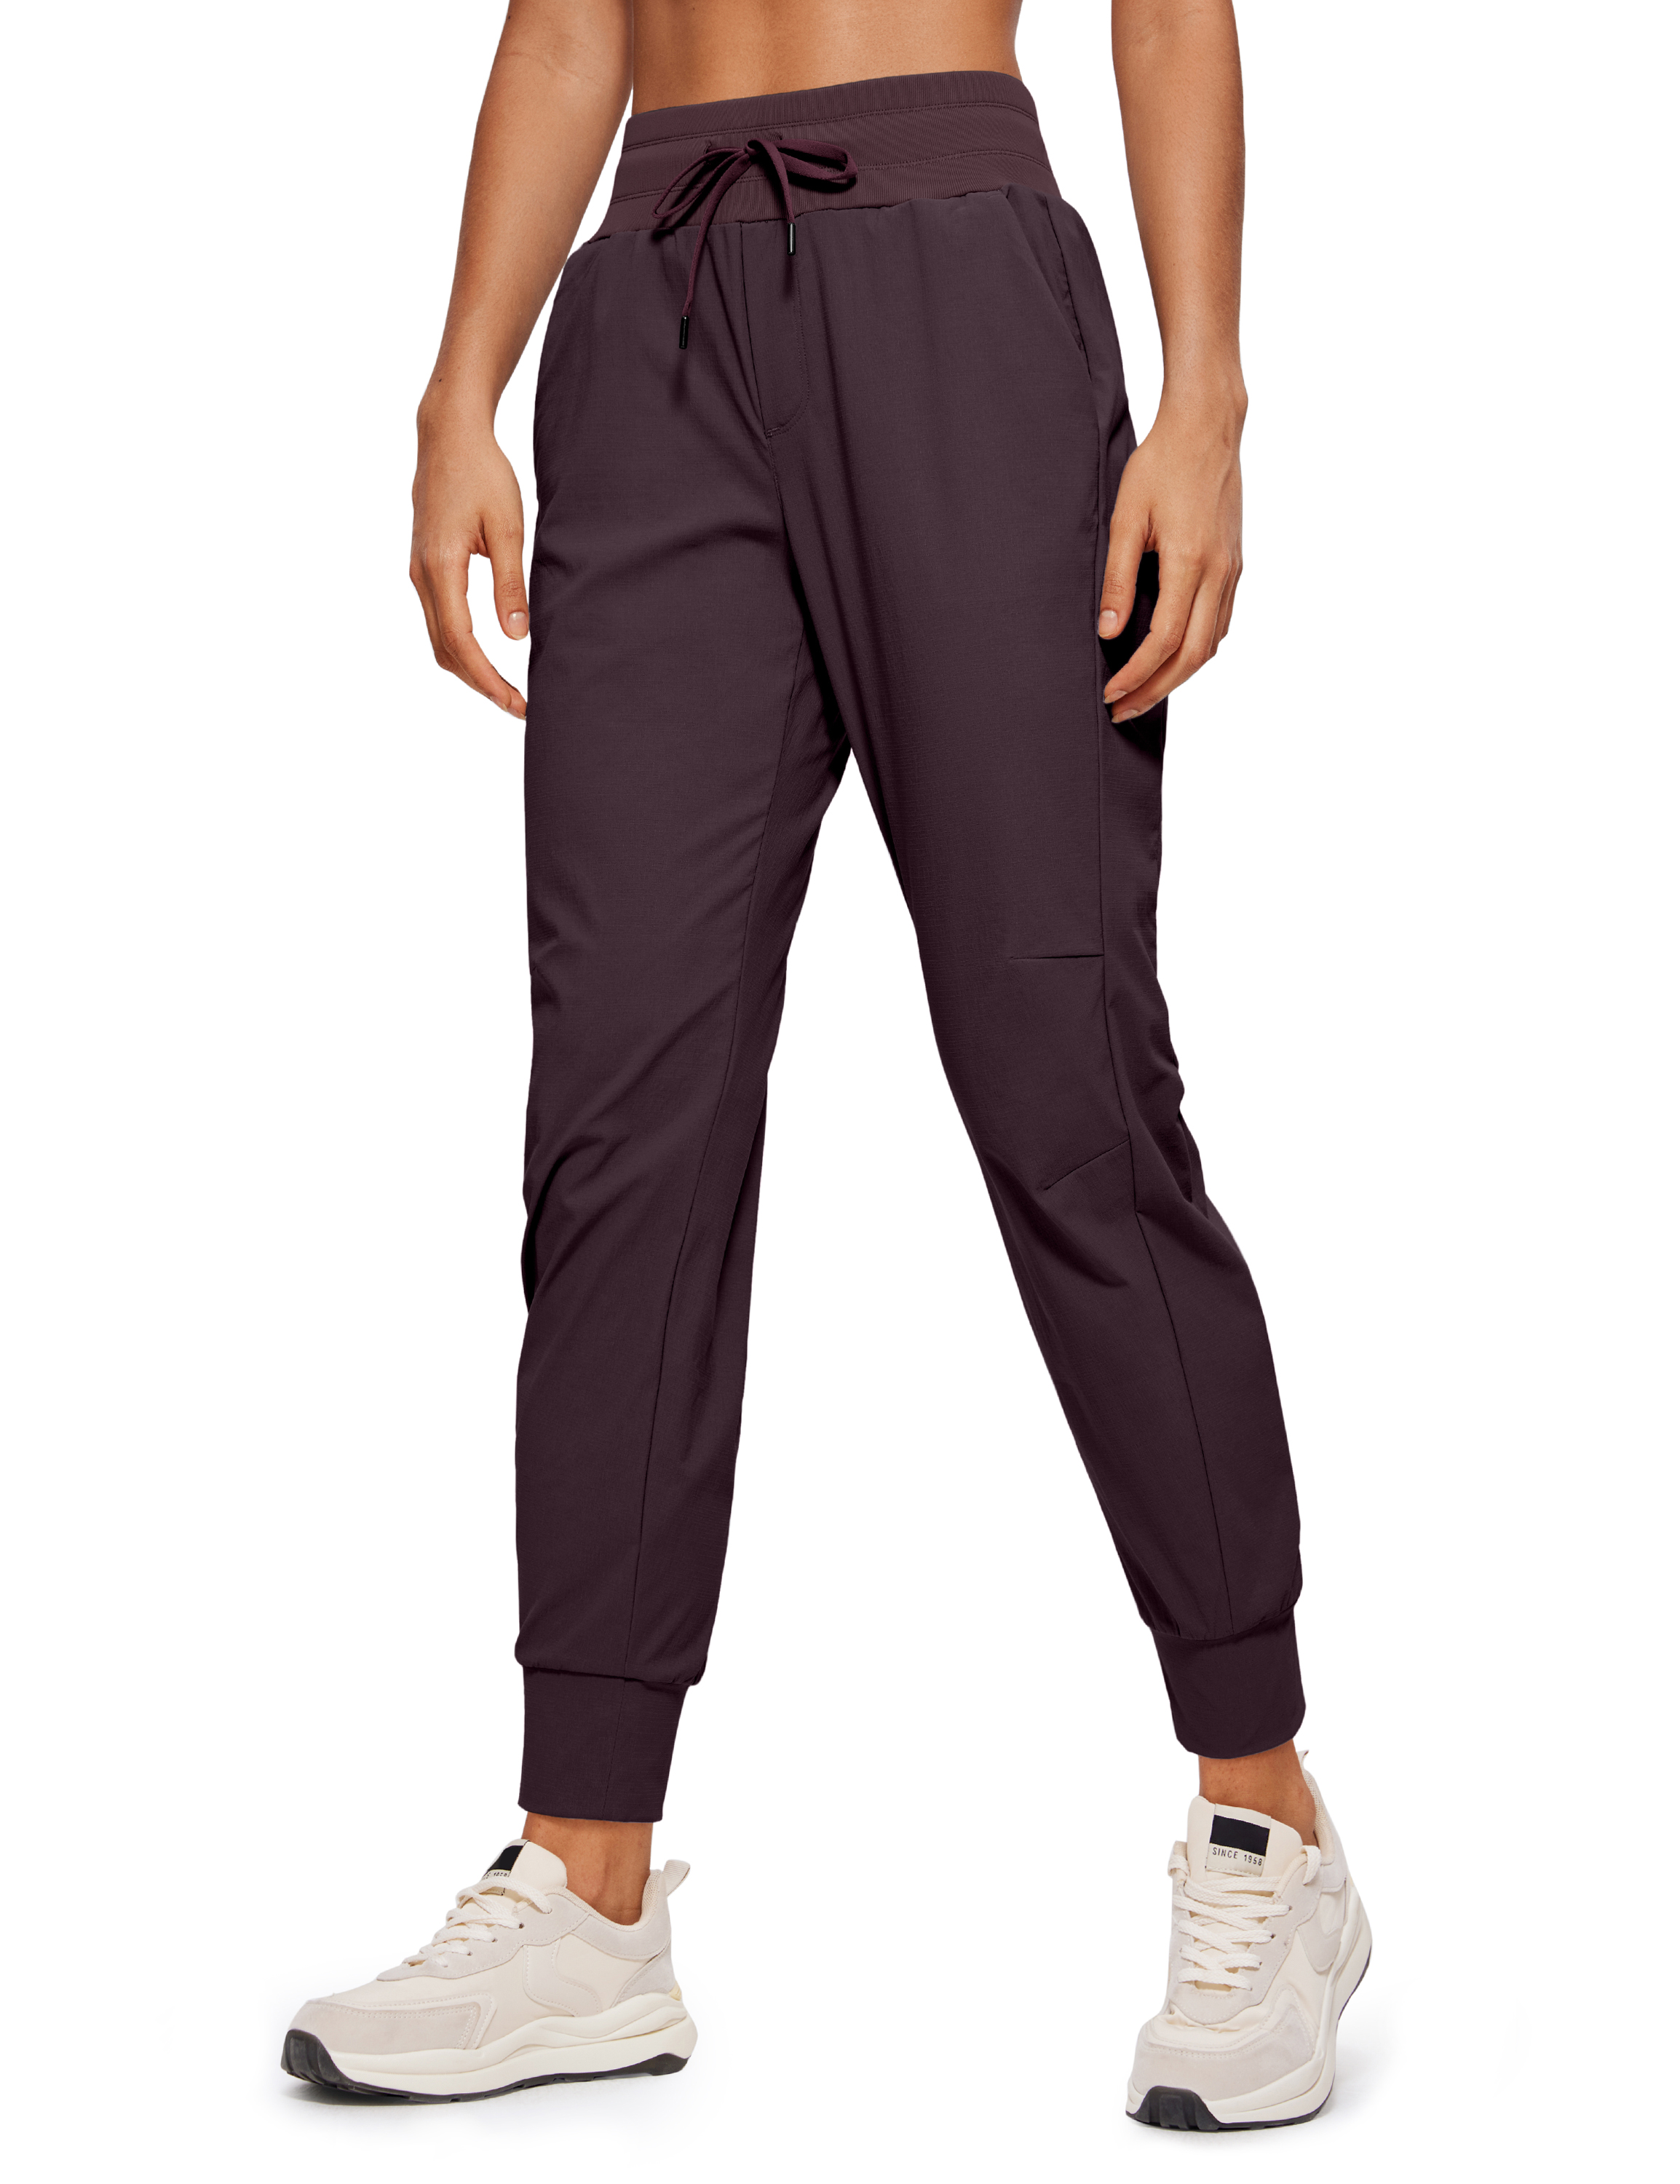 CRZ YOGA Cotton Fleece Lined Sweatpants Womens 28 Inches High Waisted Jogger